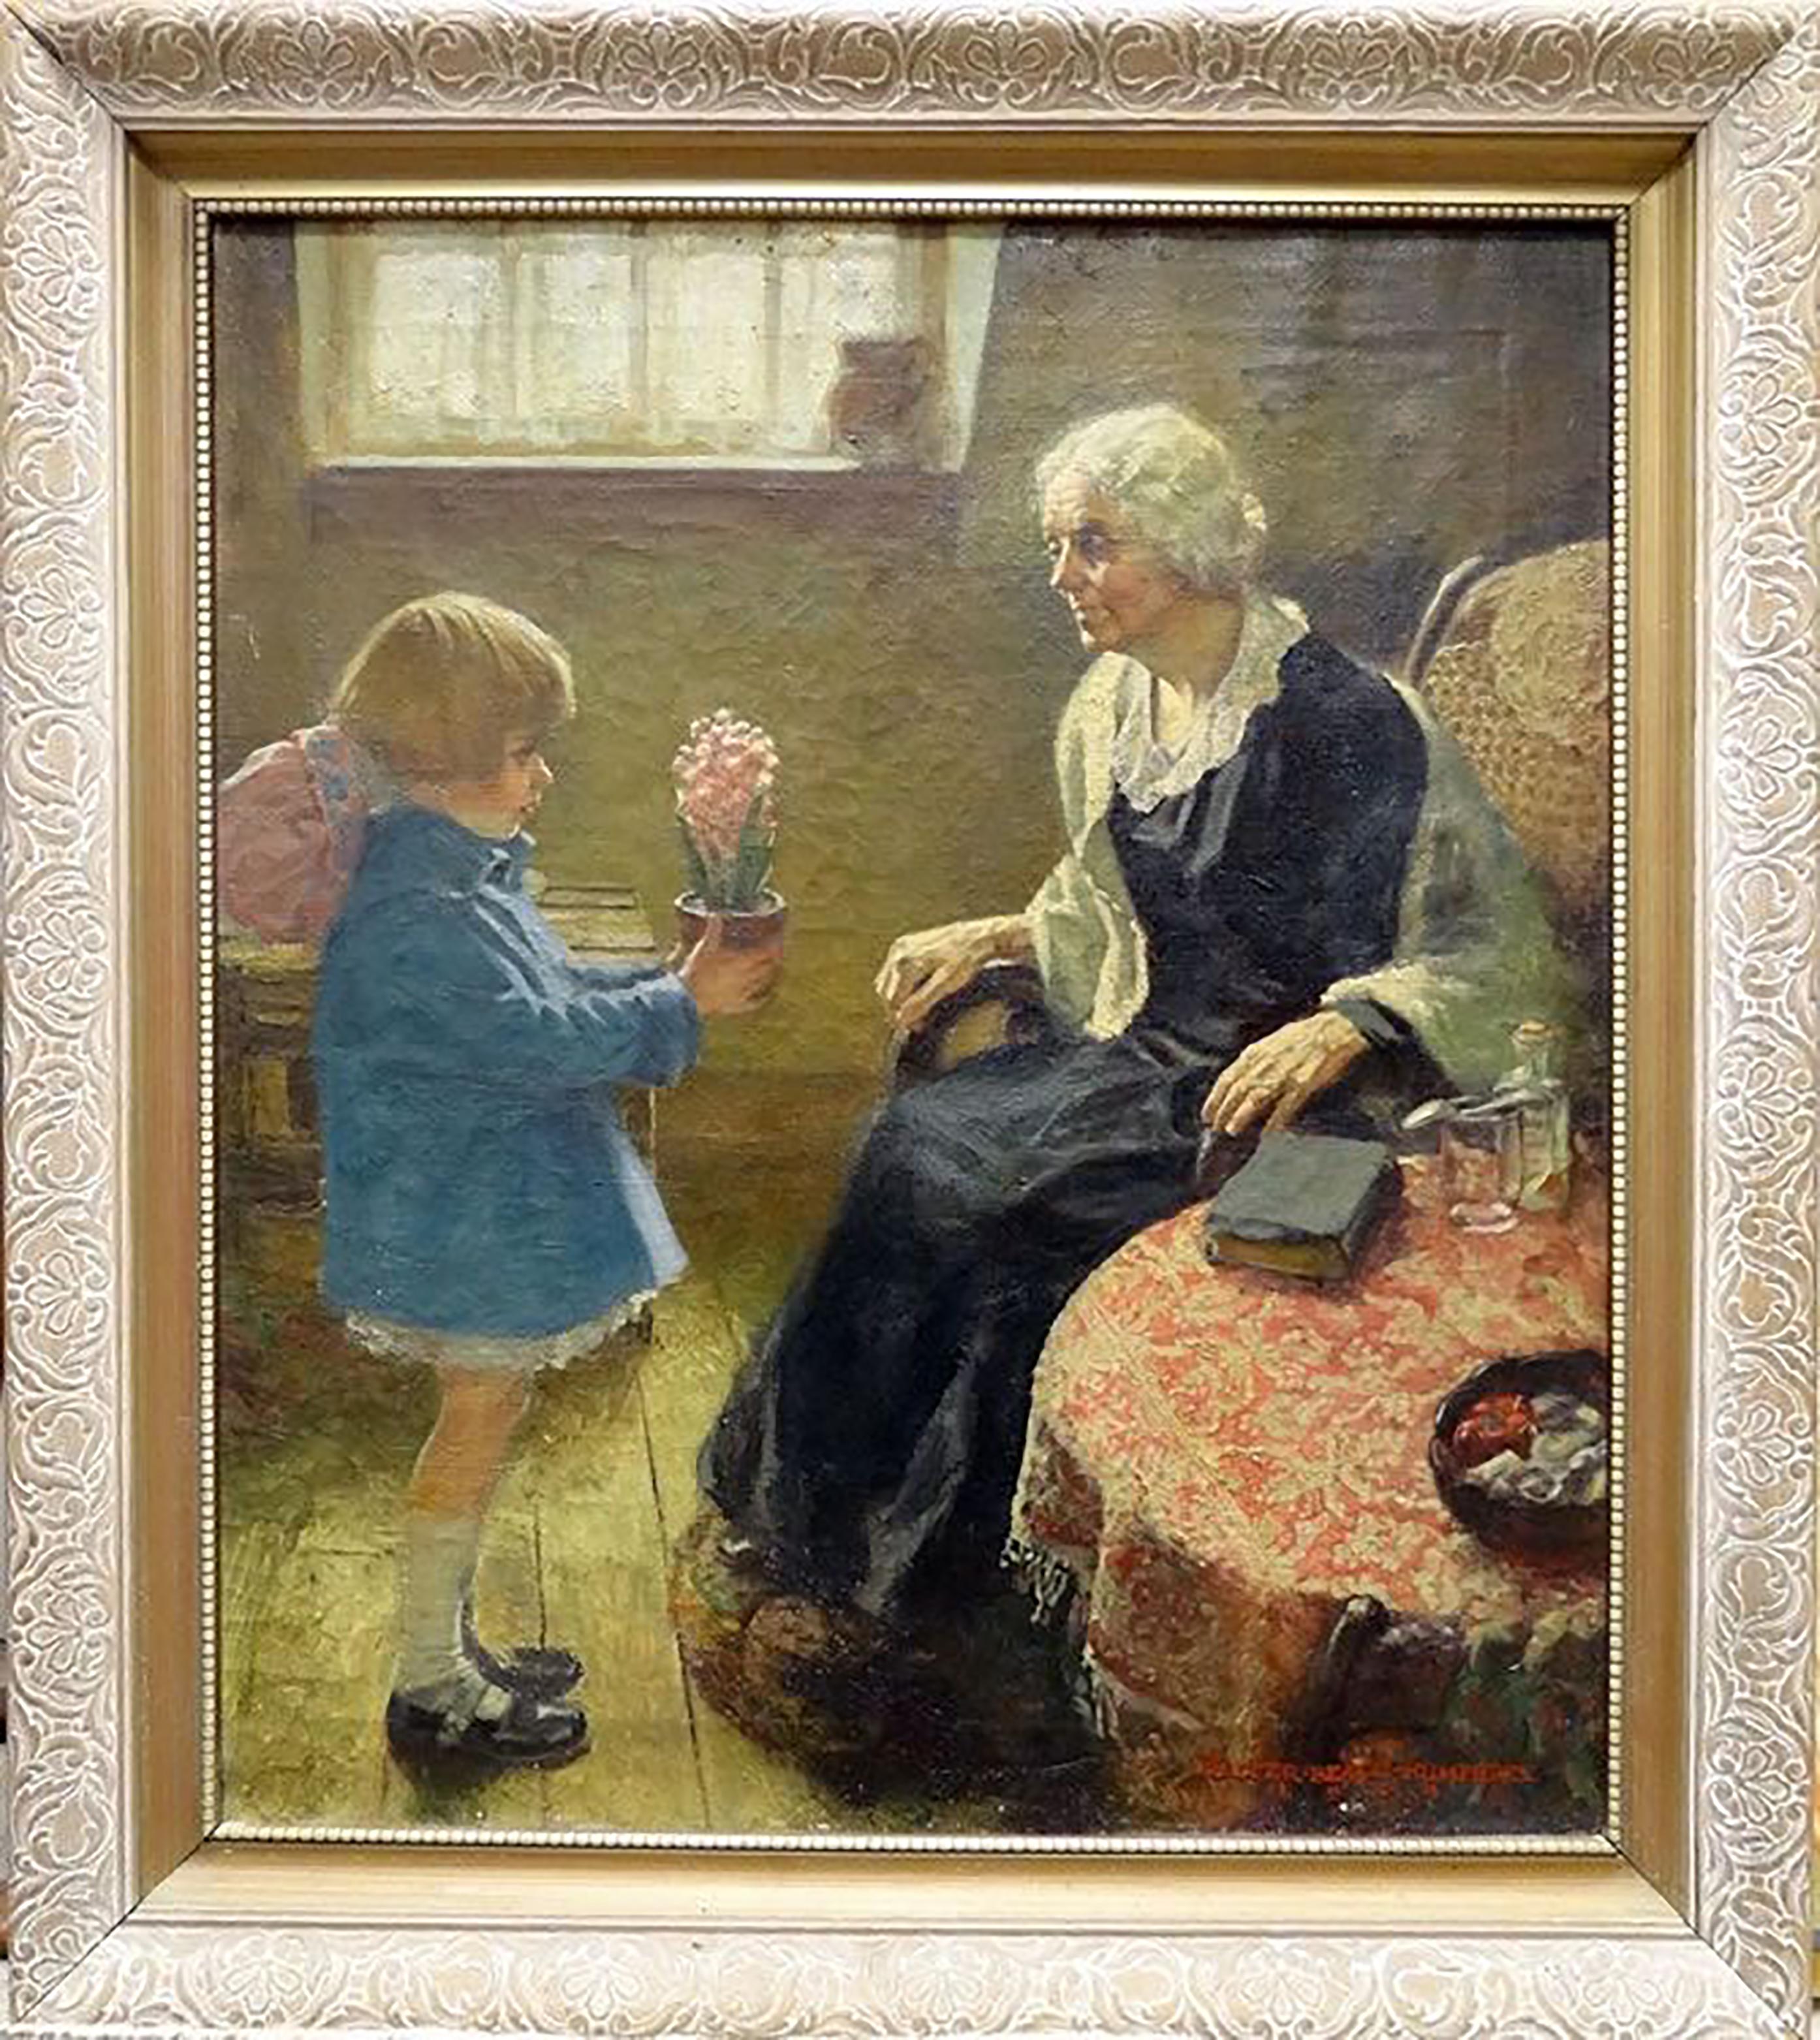 Flowers for Her Grandmother - Painting by Walter Beach Humphrey